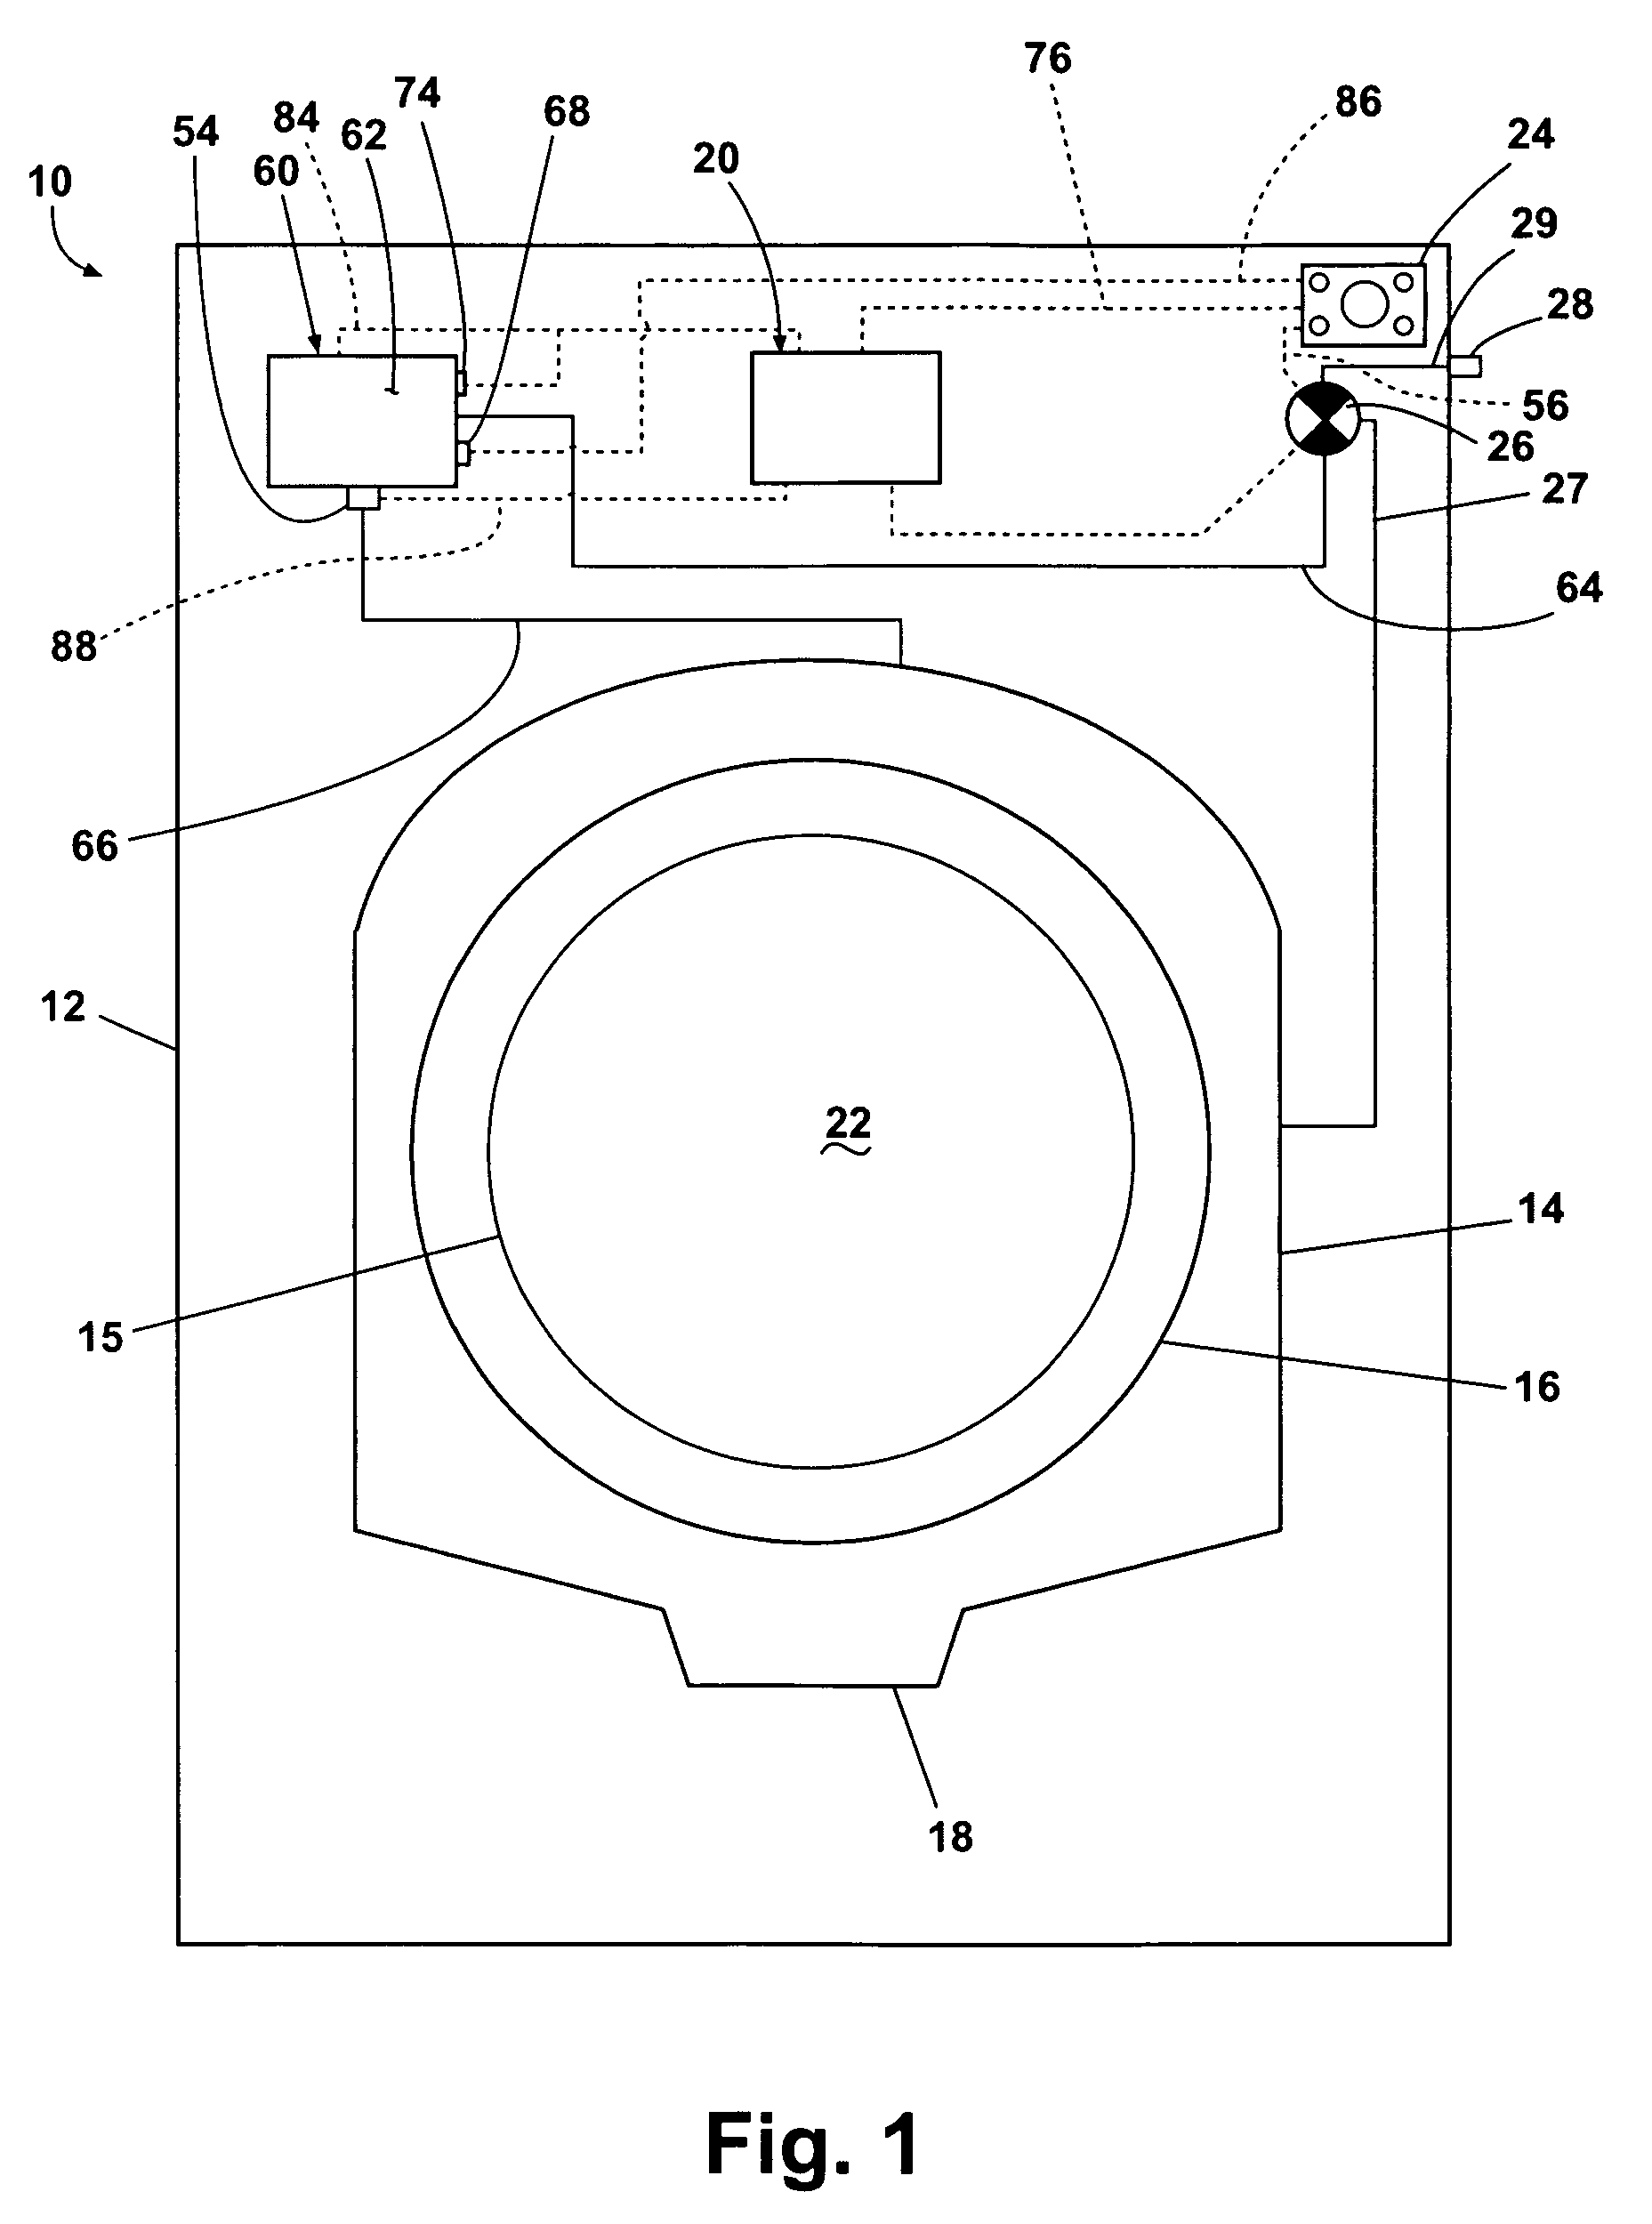 Method of indicating operational information for a bulk dispensing system